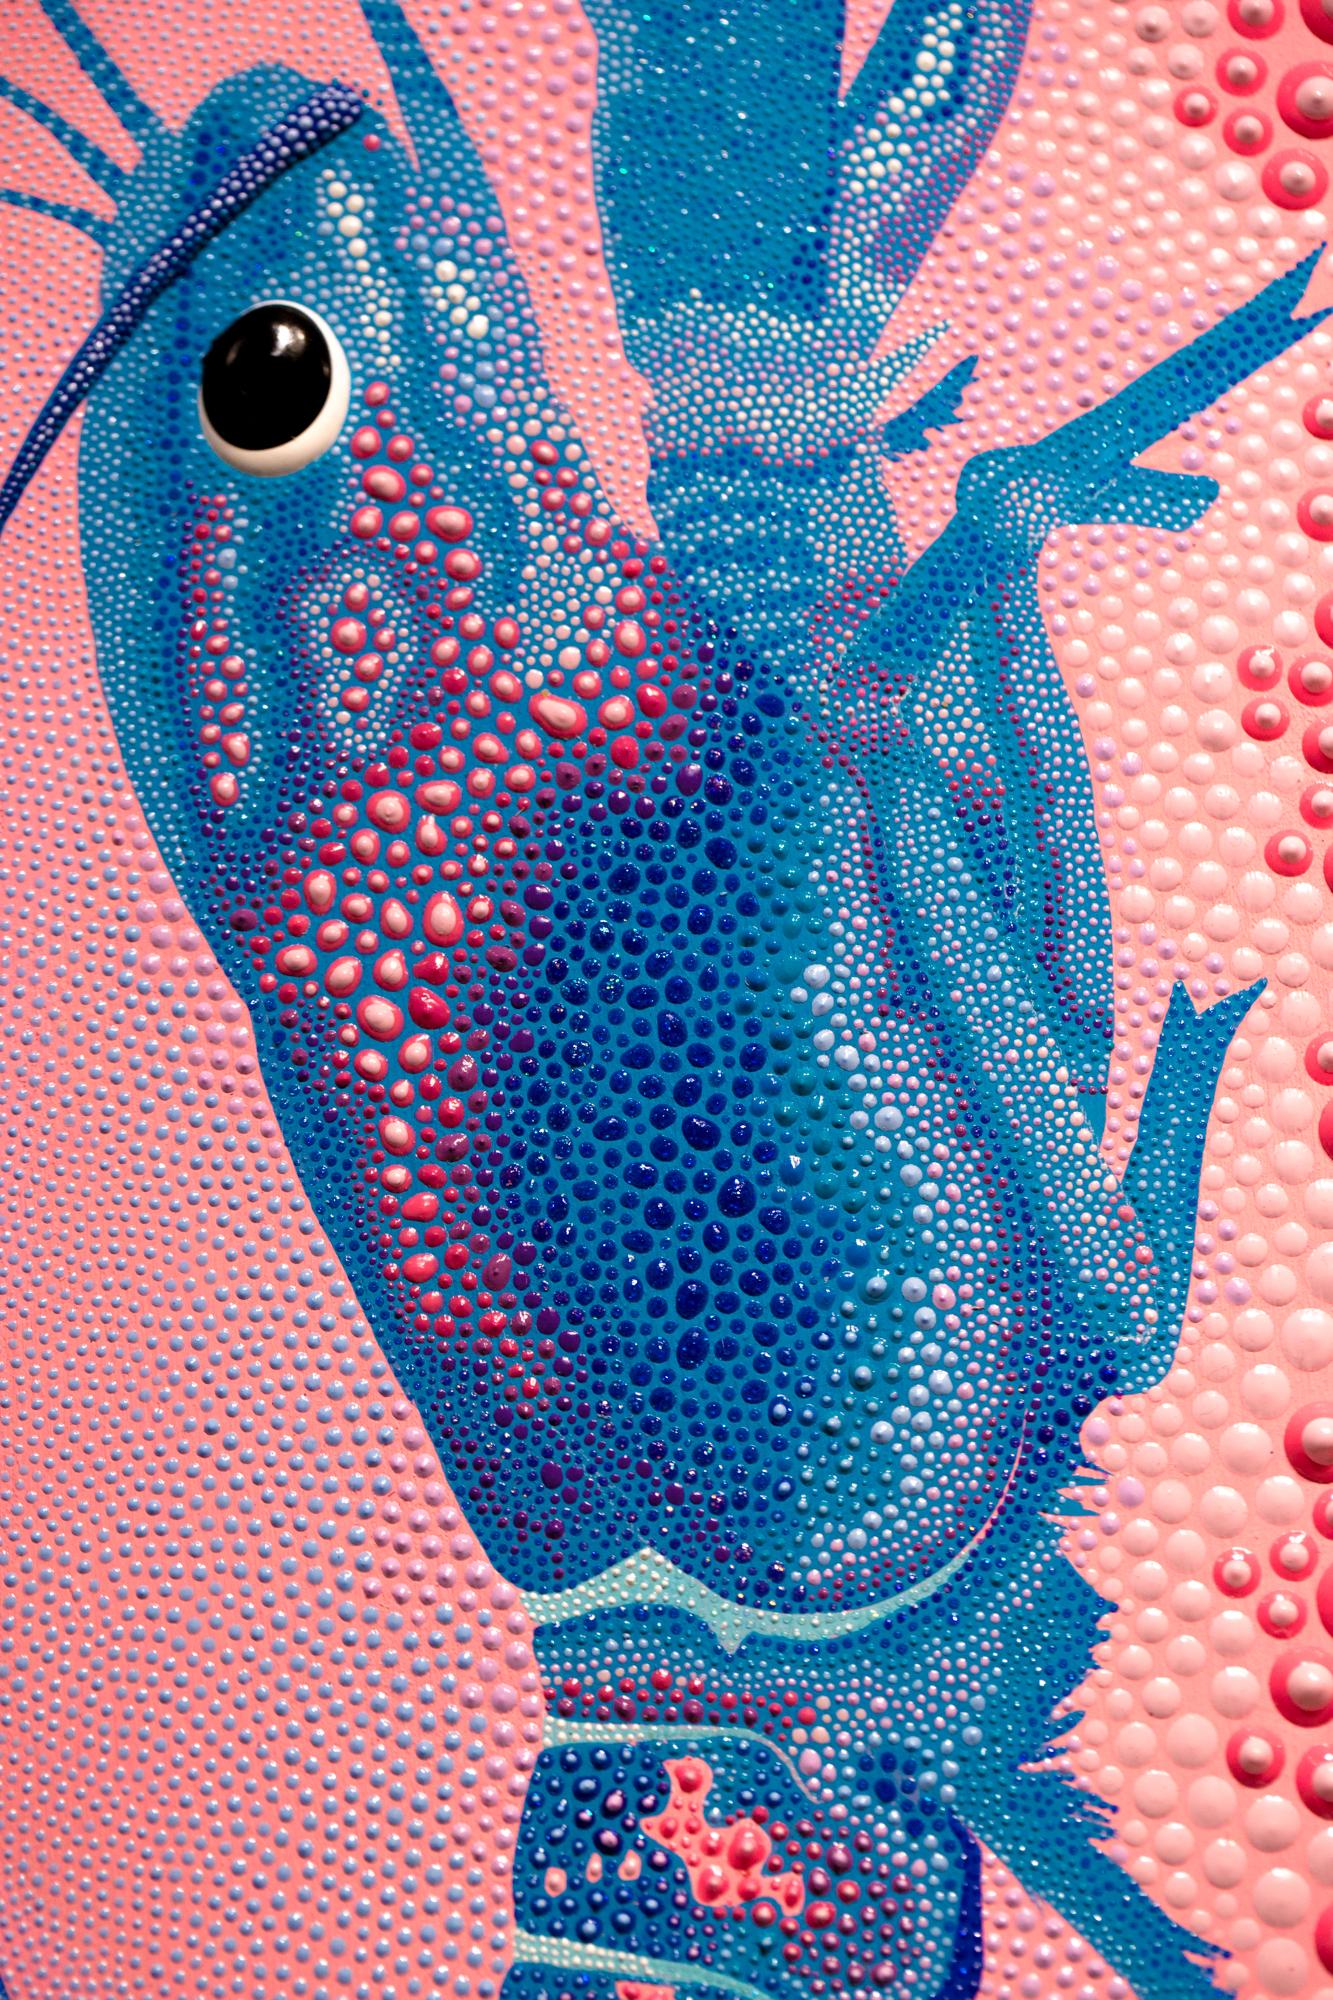 Cotton Candy Crayfish - Contemporary Painting by PJ Linden